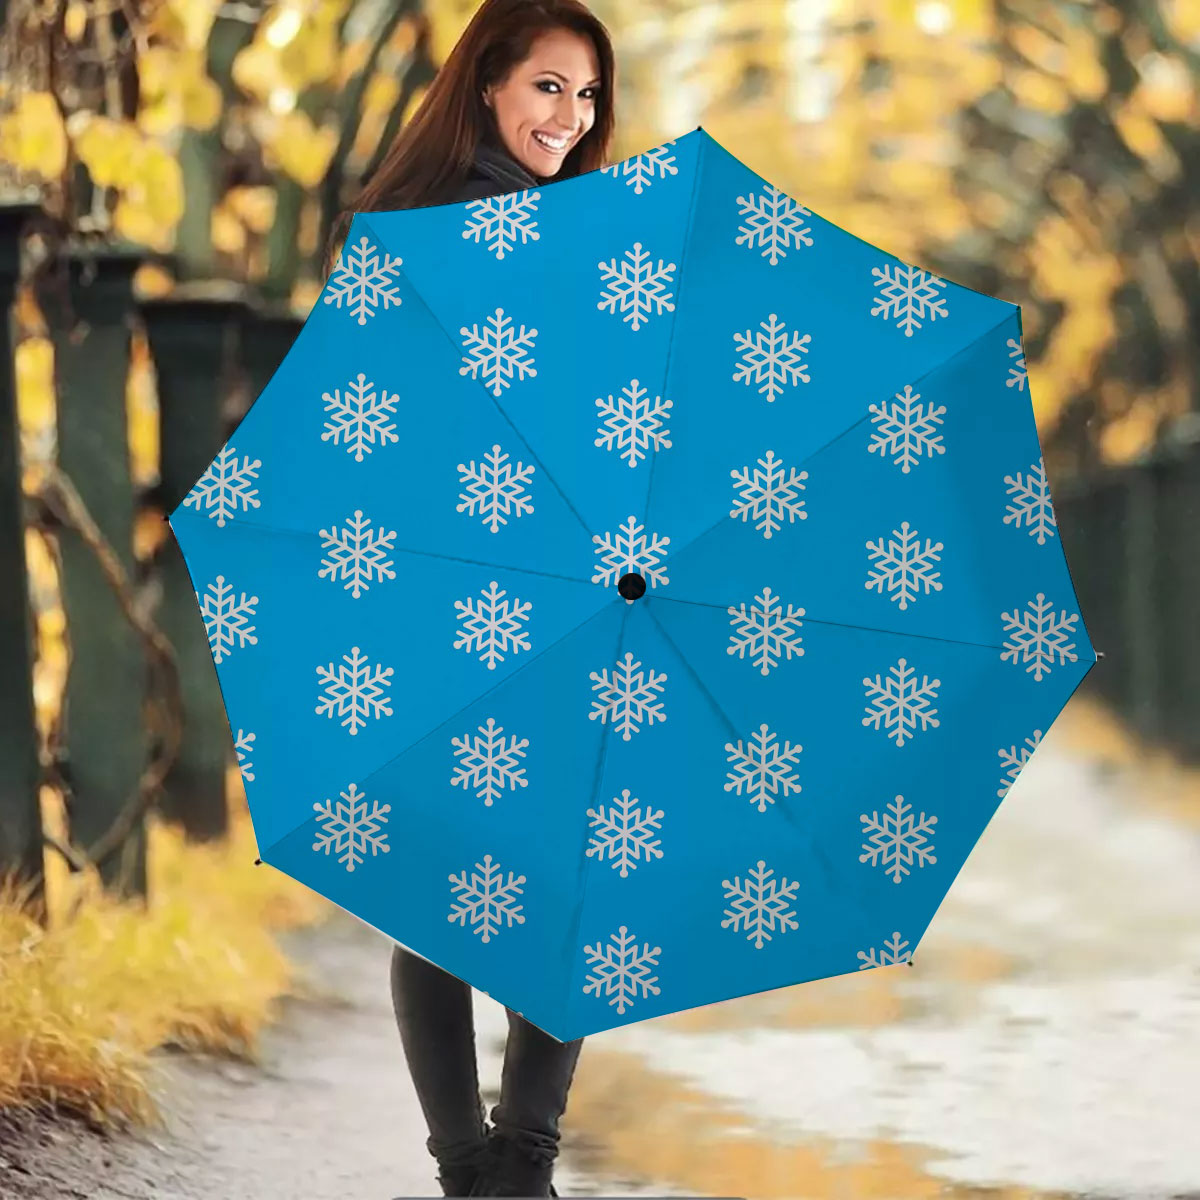 Christmas Snowflake Clipart On The Blue Background Umbrella